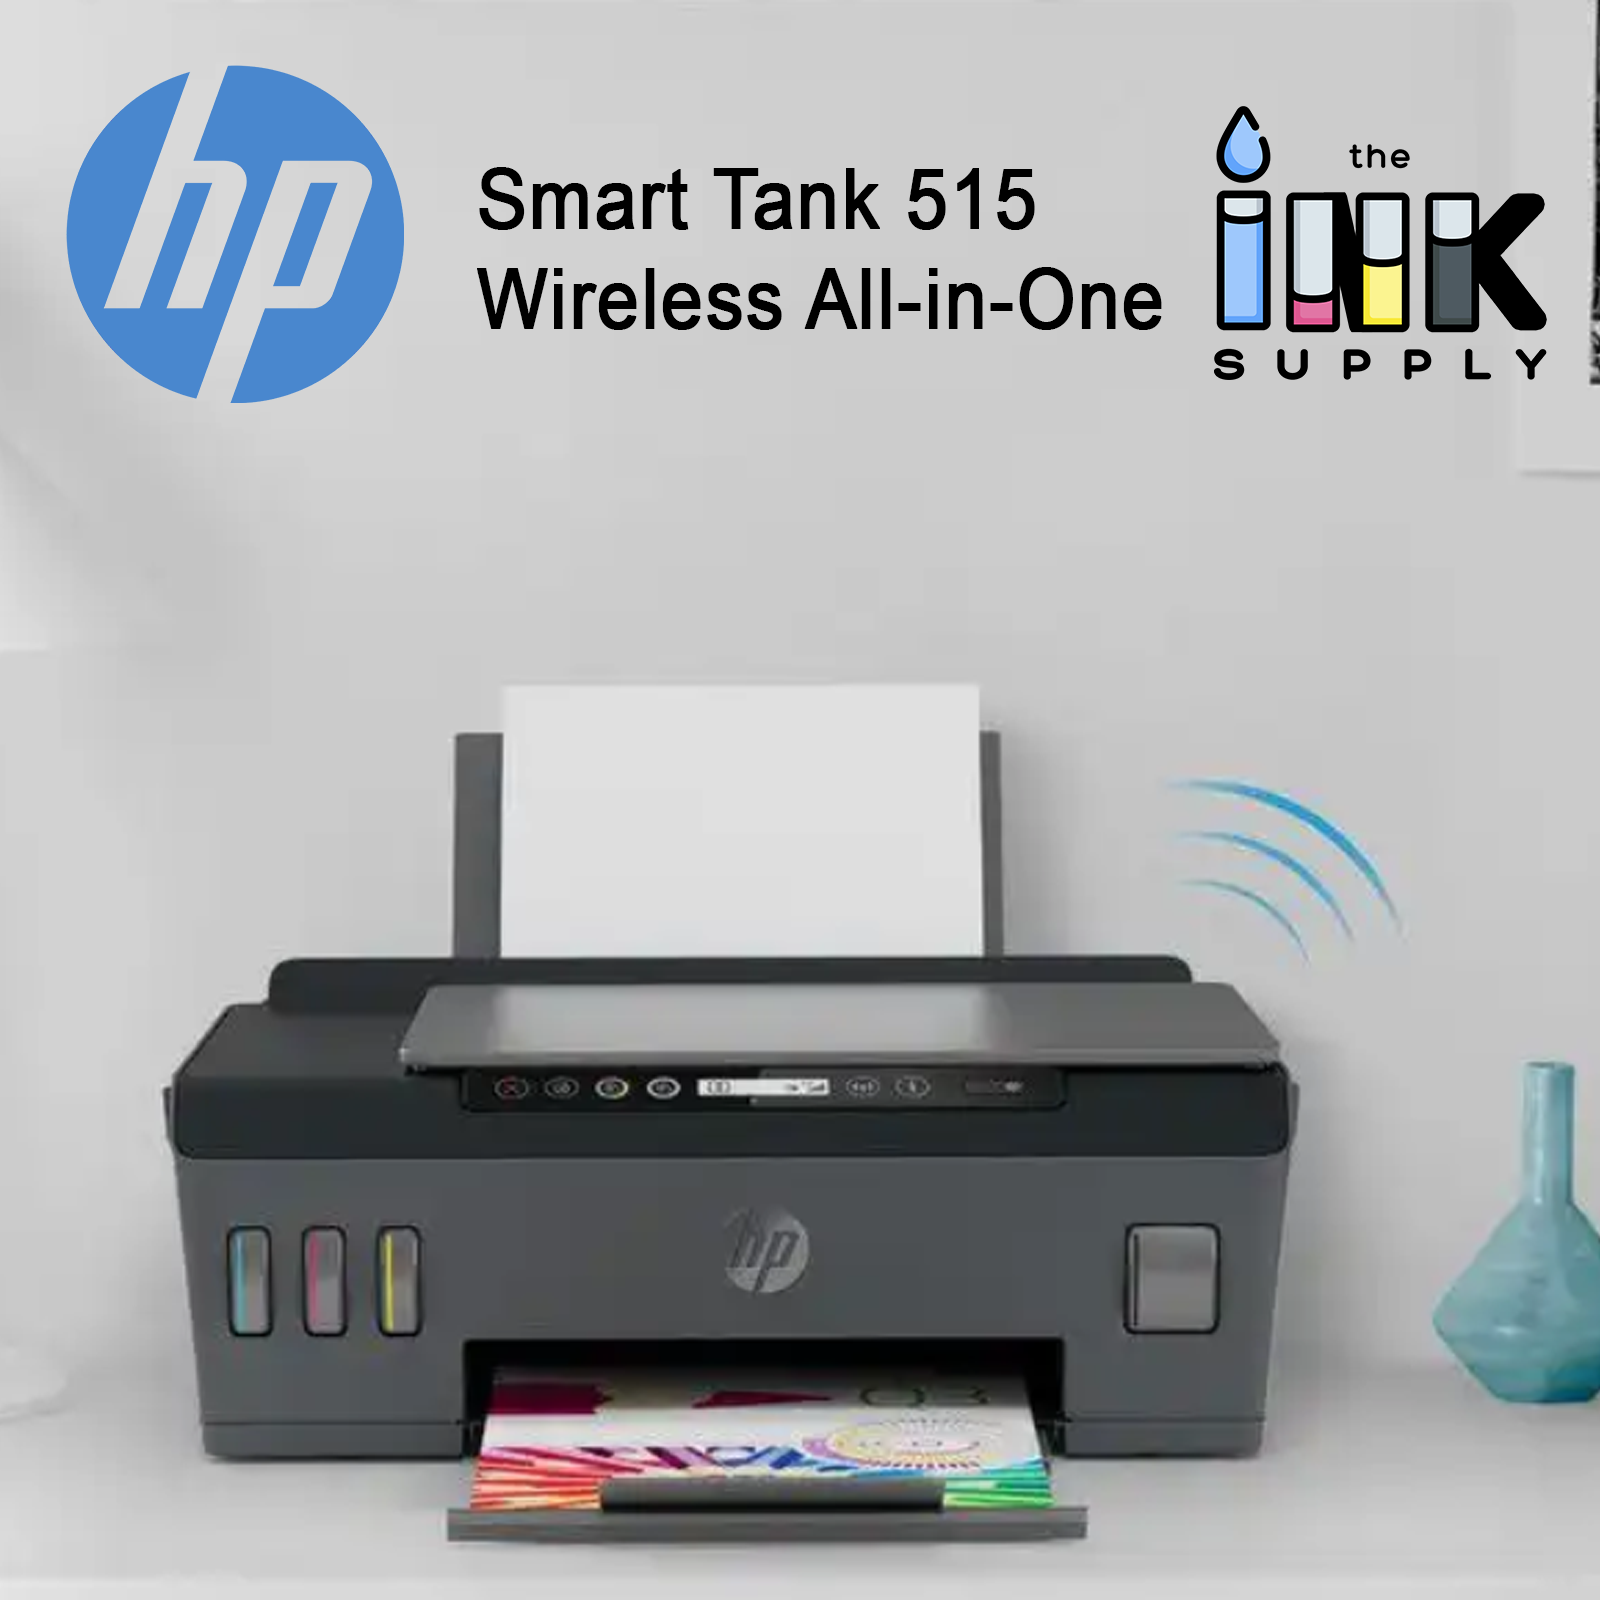 HP Smart Tank 515 with FREE INK Wireless Function All in One Printer Scanner Photocopier Xerox Low Cost Affordable Continuous Ink Refill, Fast, Cost Effective and High Printing